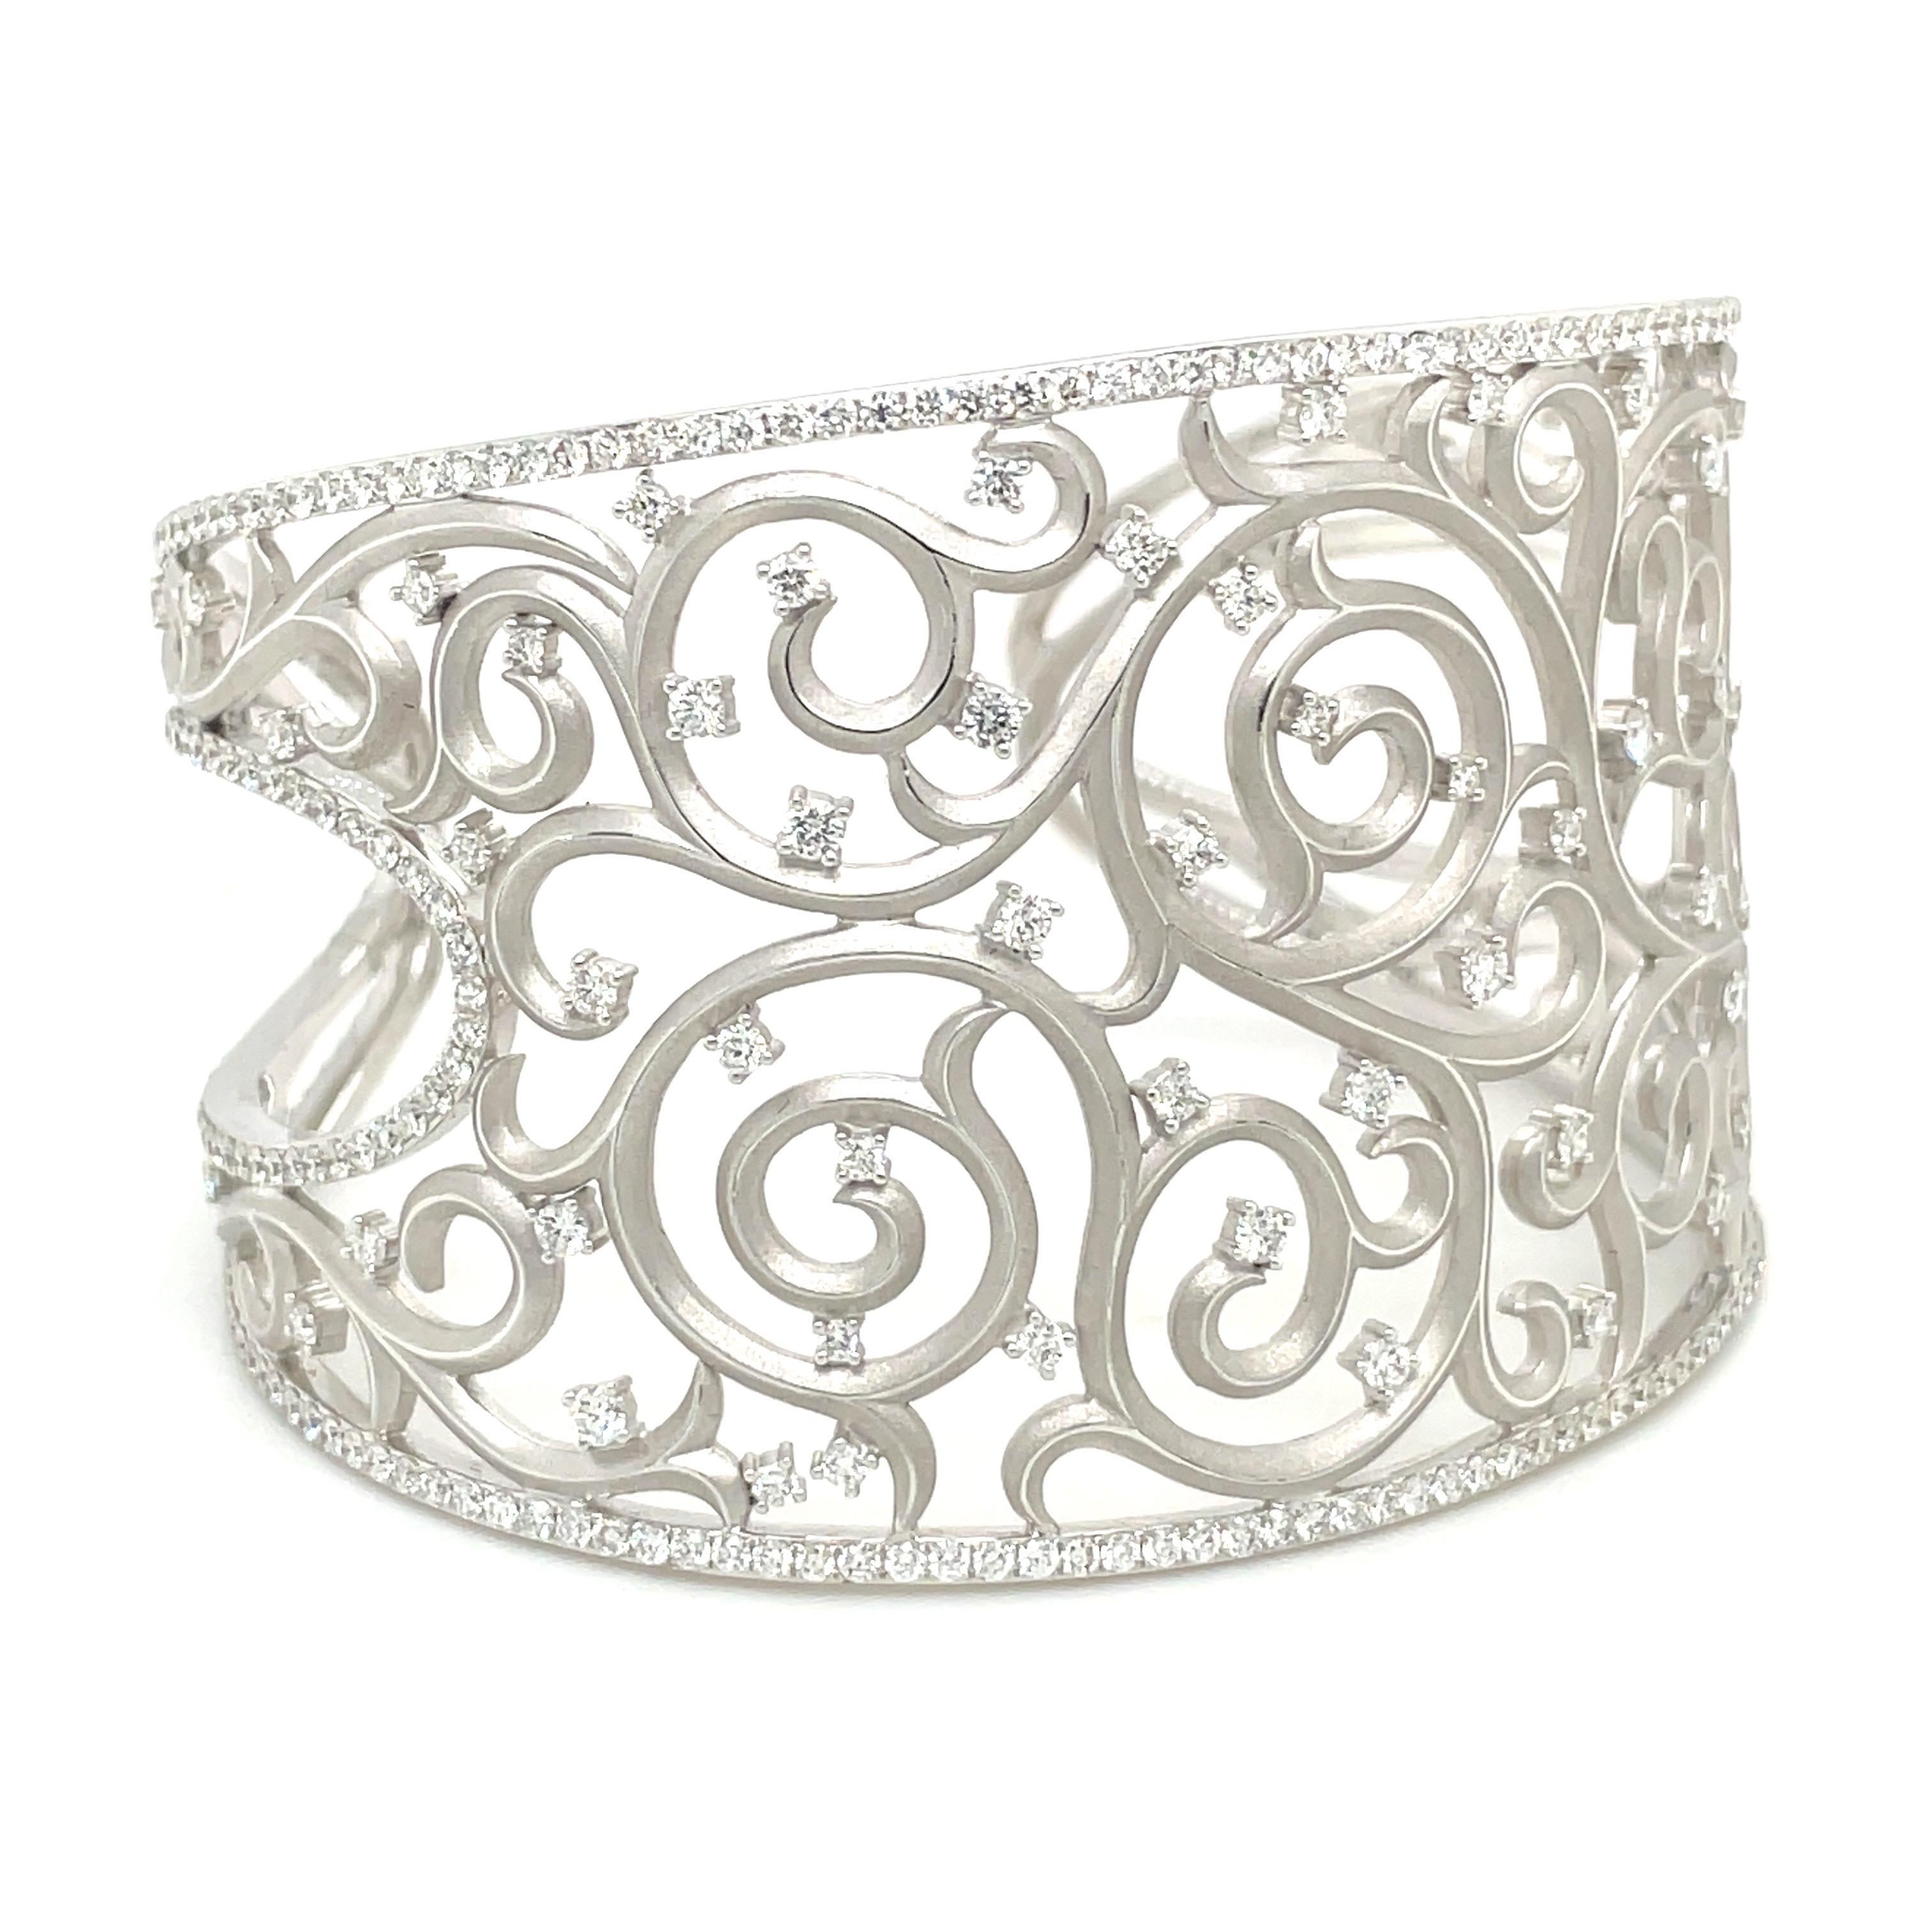 Cellini 18kt White Gold and Diamond 4.90Ct. Lace Cuff Bracelet For Sale 8